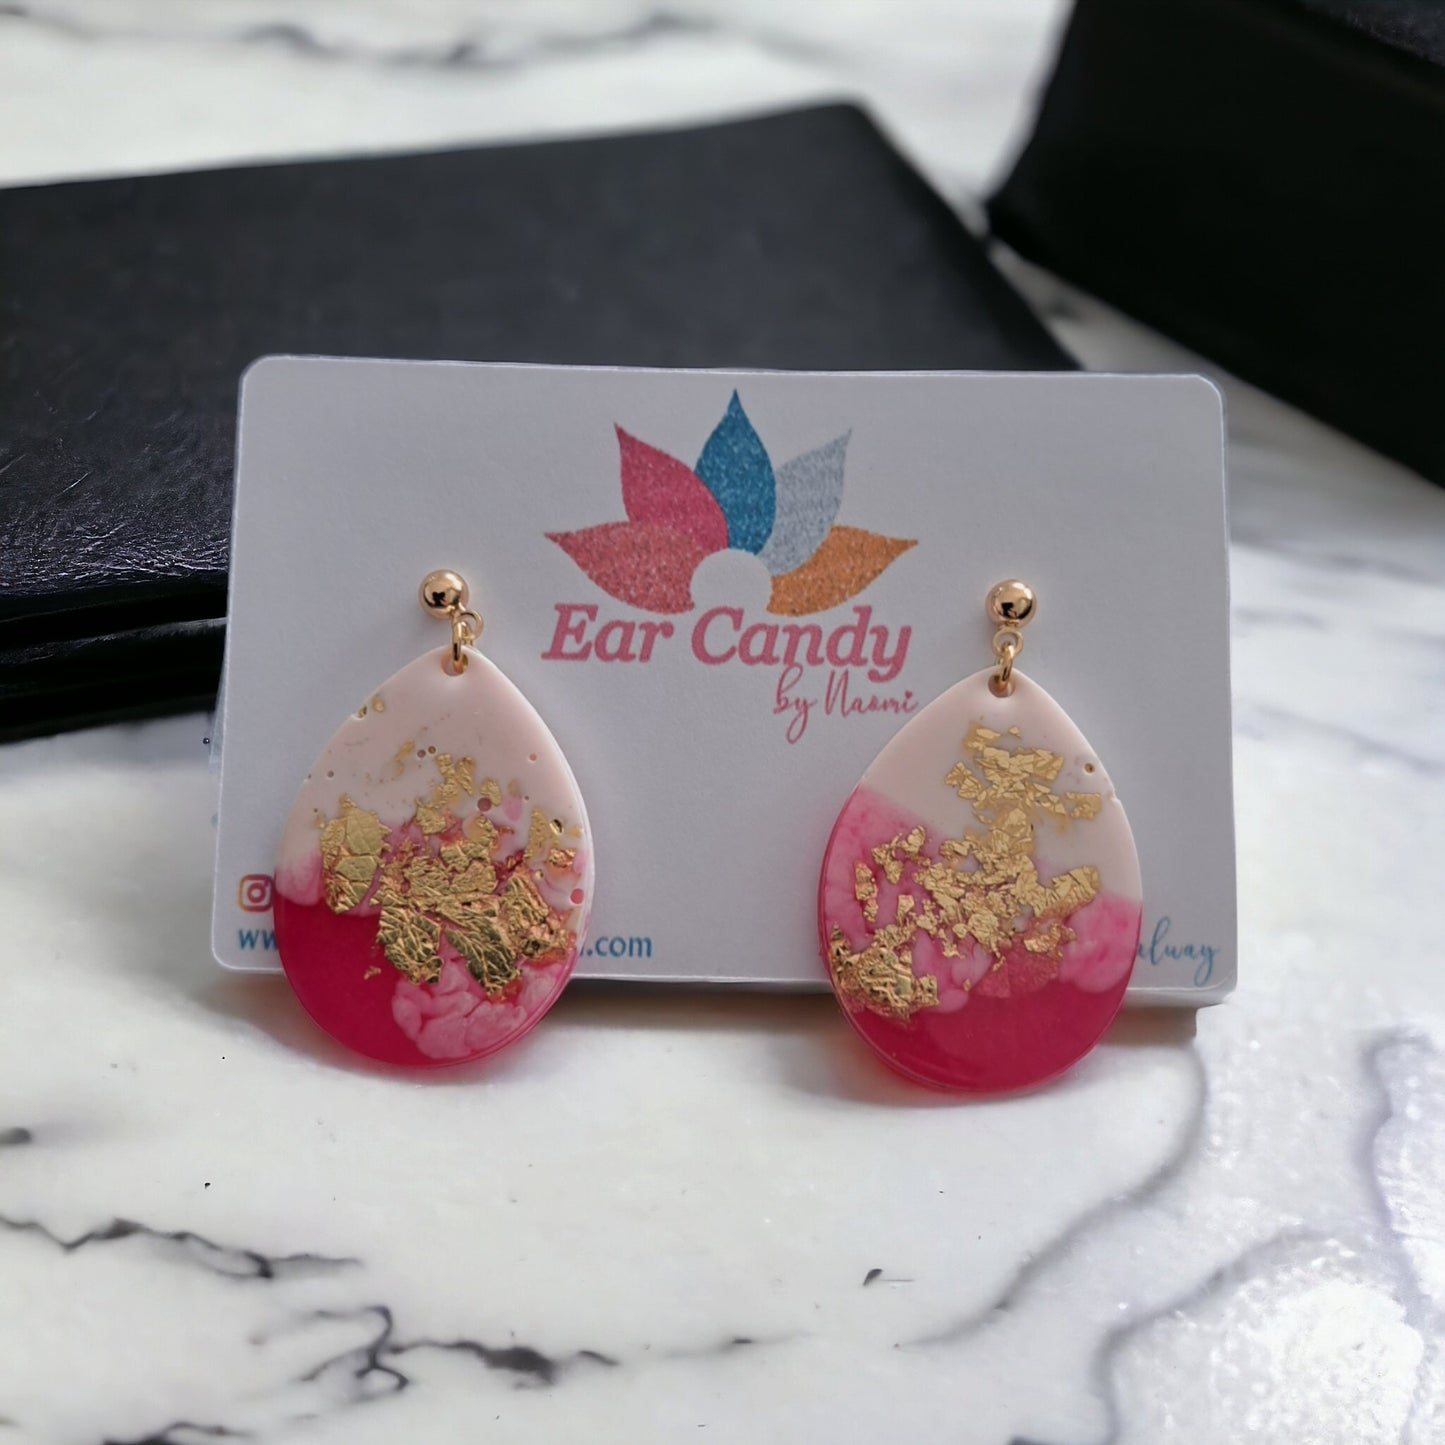 Strawberries & Cream Tina drops - Ear Candy by Naomi Strawberries & Cream Tina drops